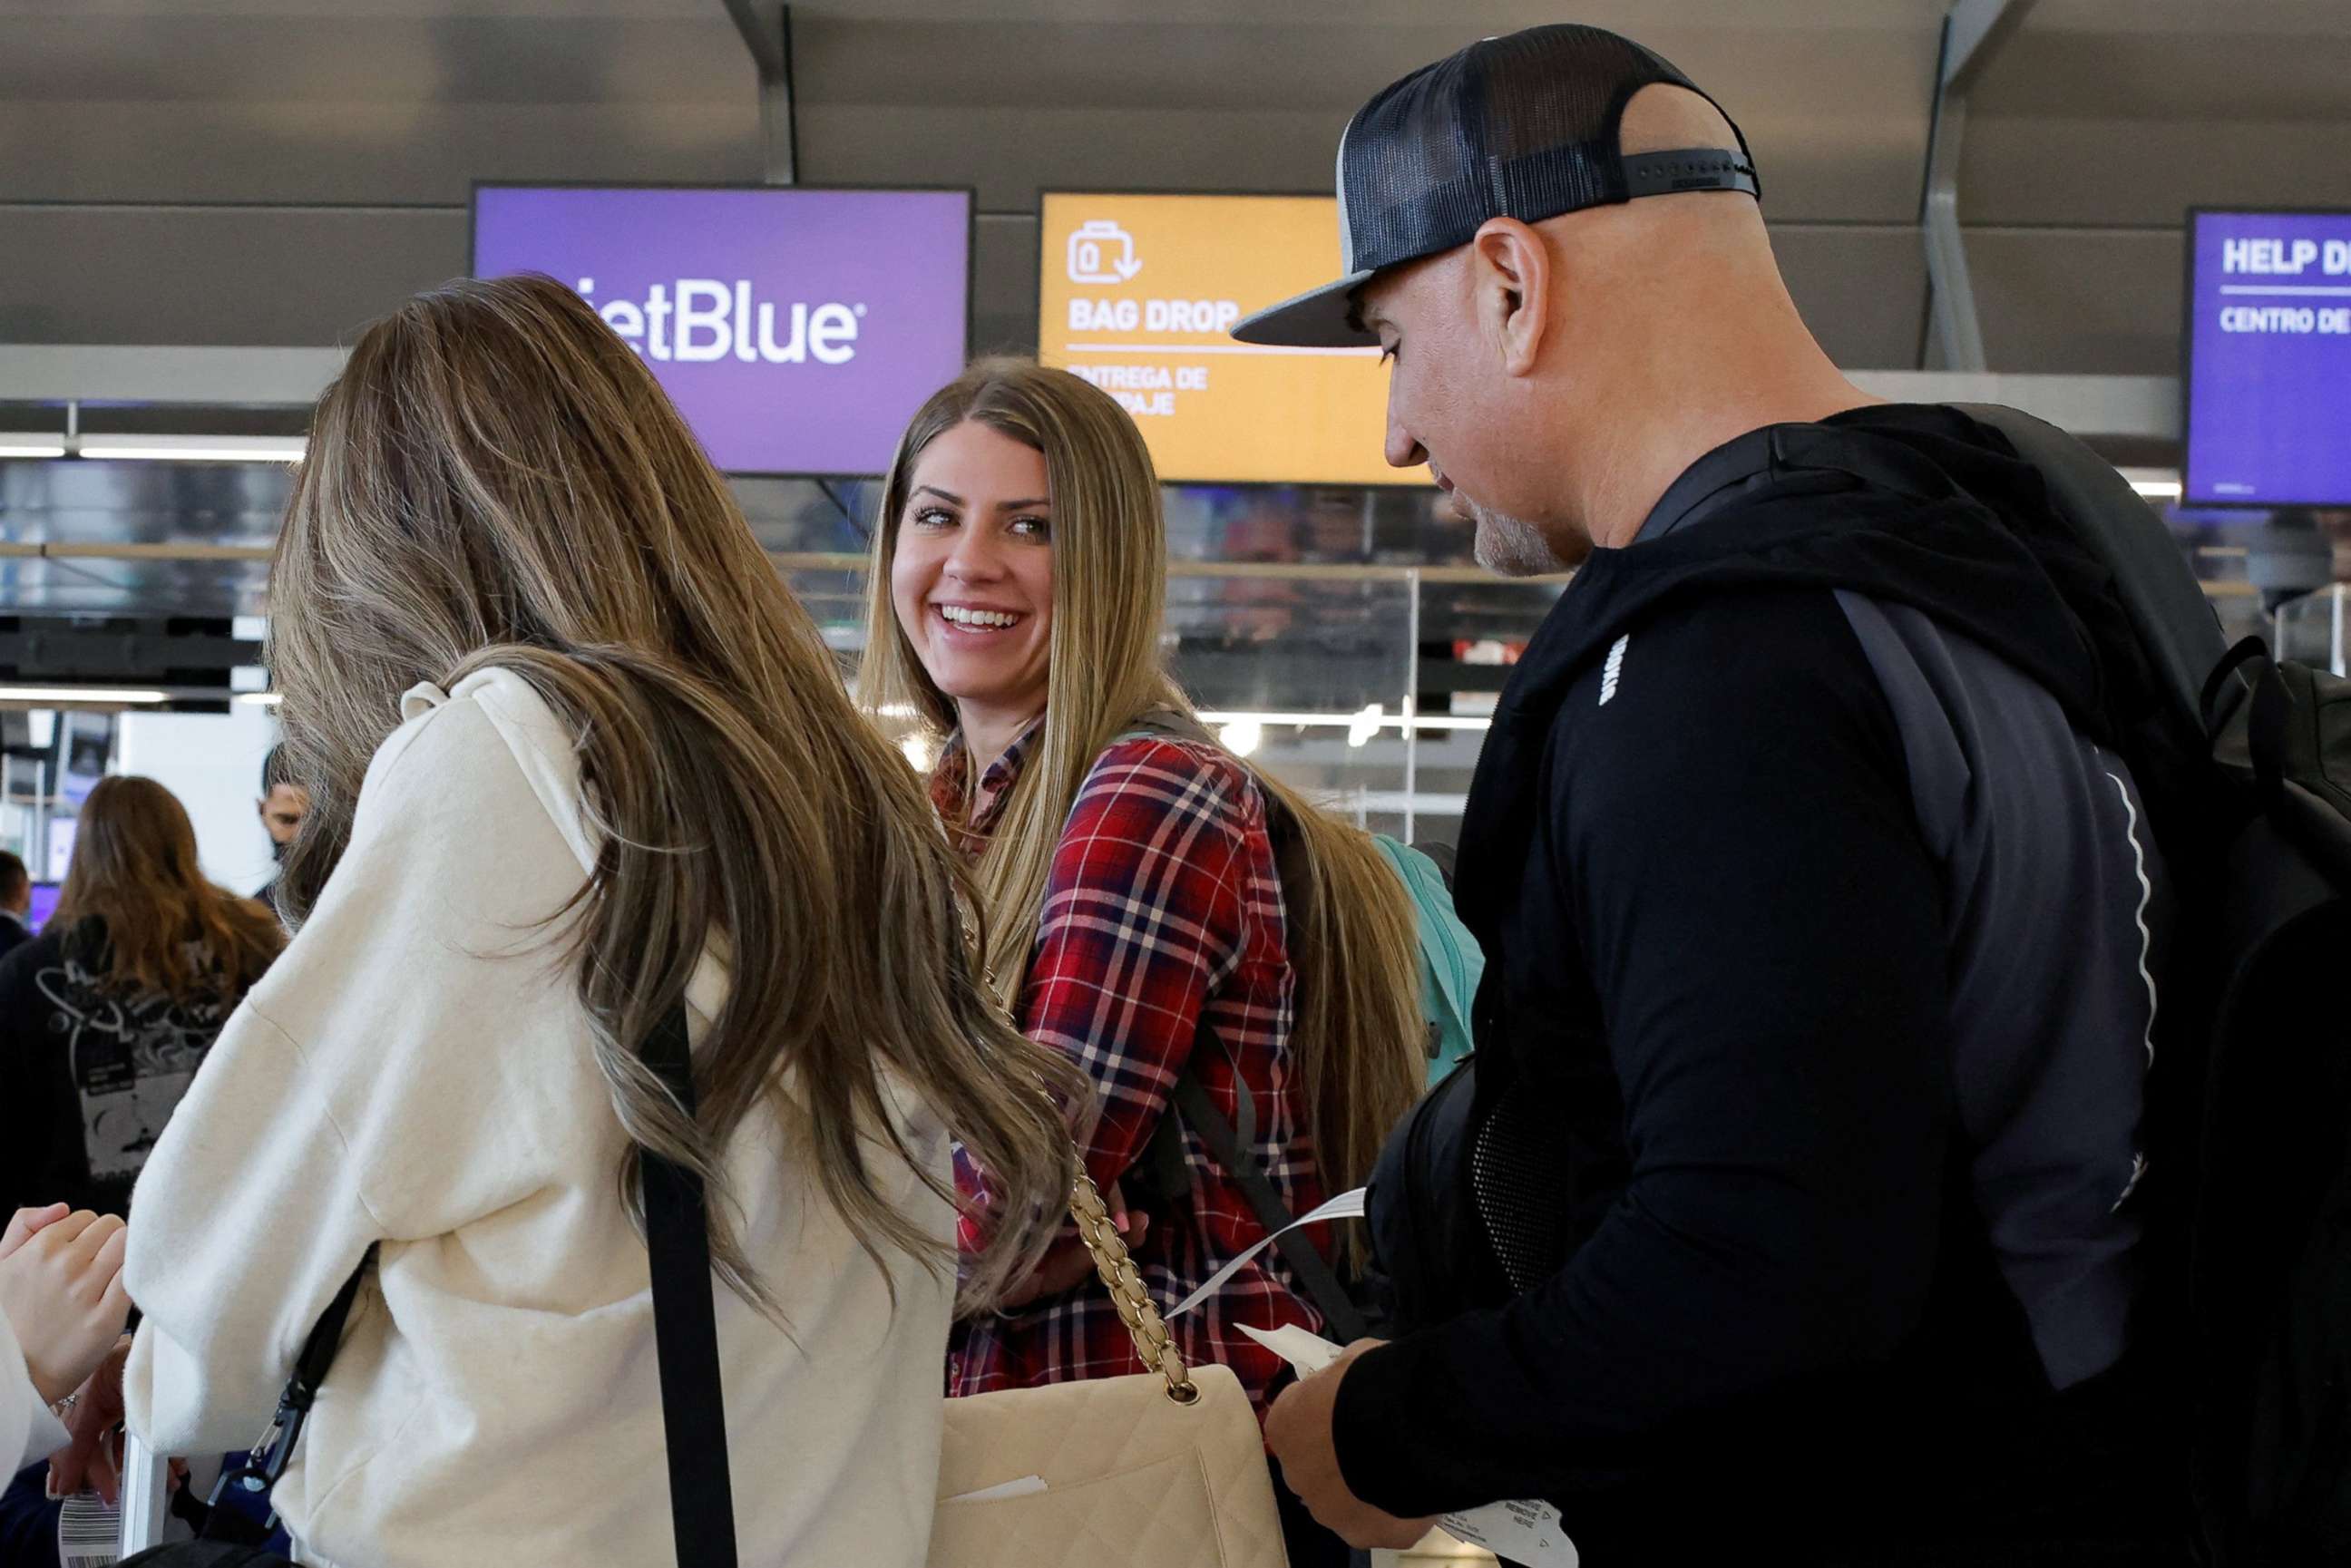 PHOTO: People without masks arrive to check in at La Guardia Airport after a federal judge's ruling that the 14-month-old mask mandate on public transportation was unlawful, in New York, April 19, 2022.